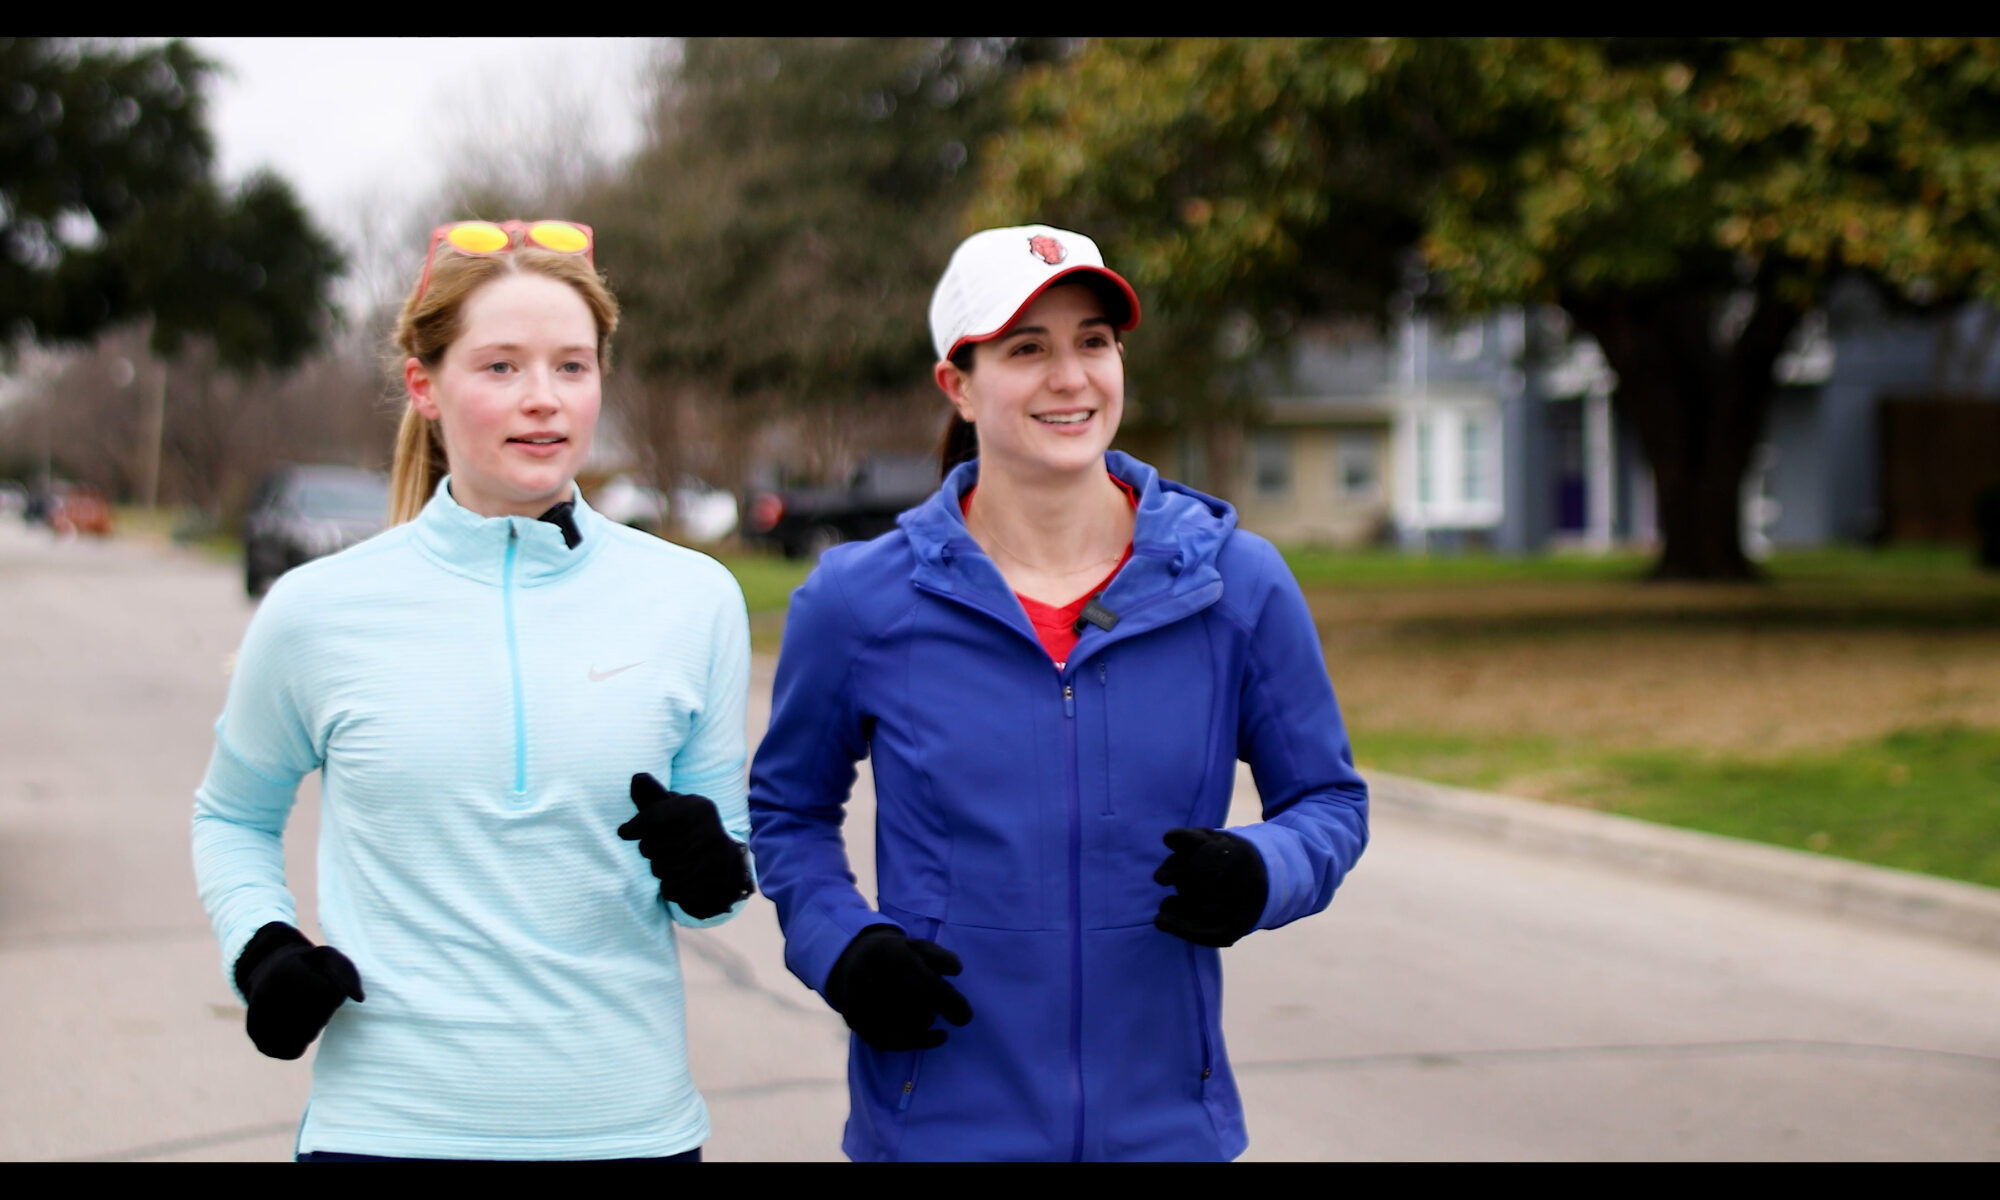 Carter Clatterbuck, MS3, CO2025 and Assistant Professor, Jamie Erwin, M.D., run and train together for the 2024 Cowtown Marathon in Fort Worth, Texas.